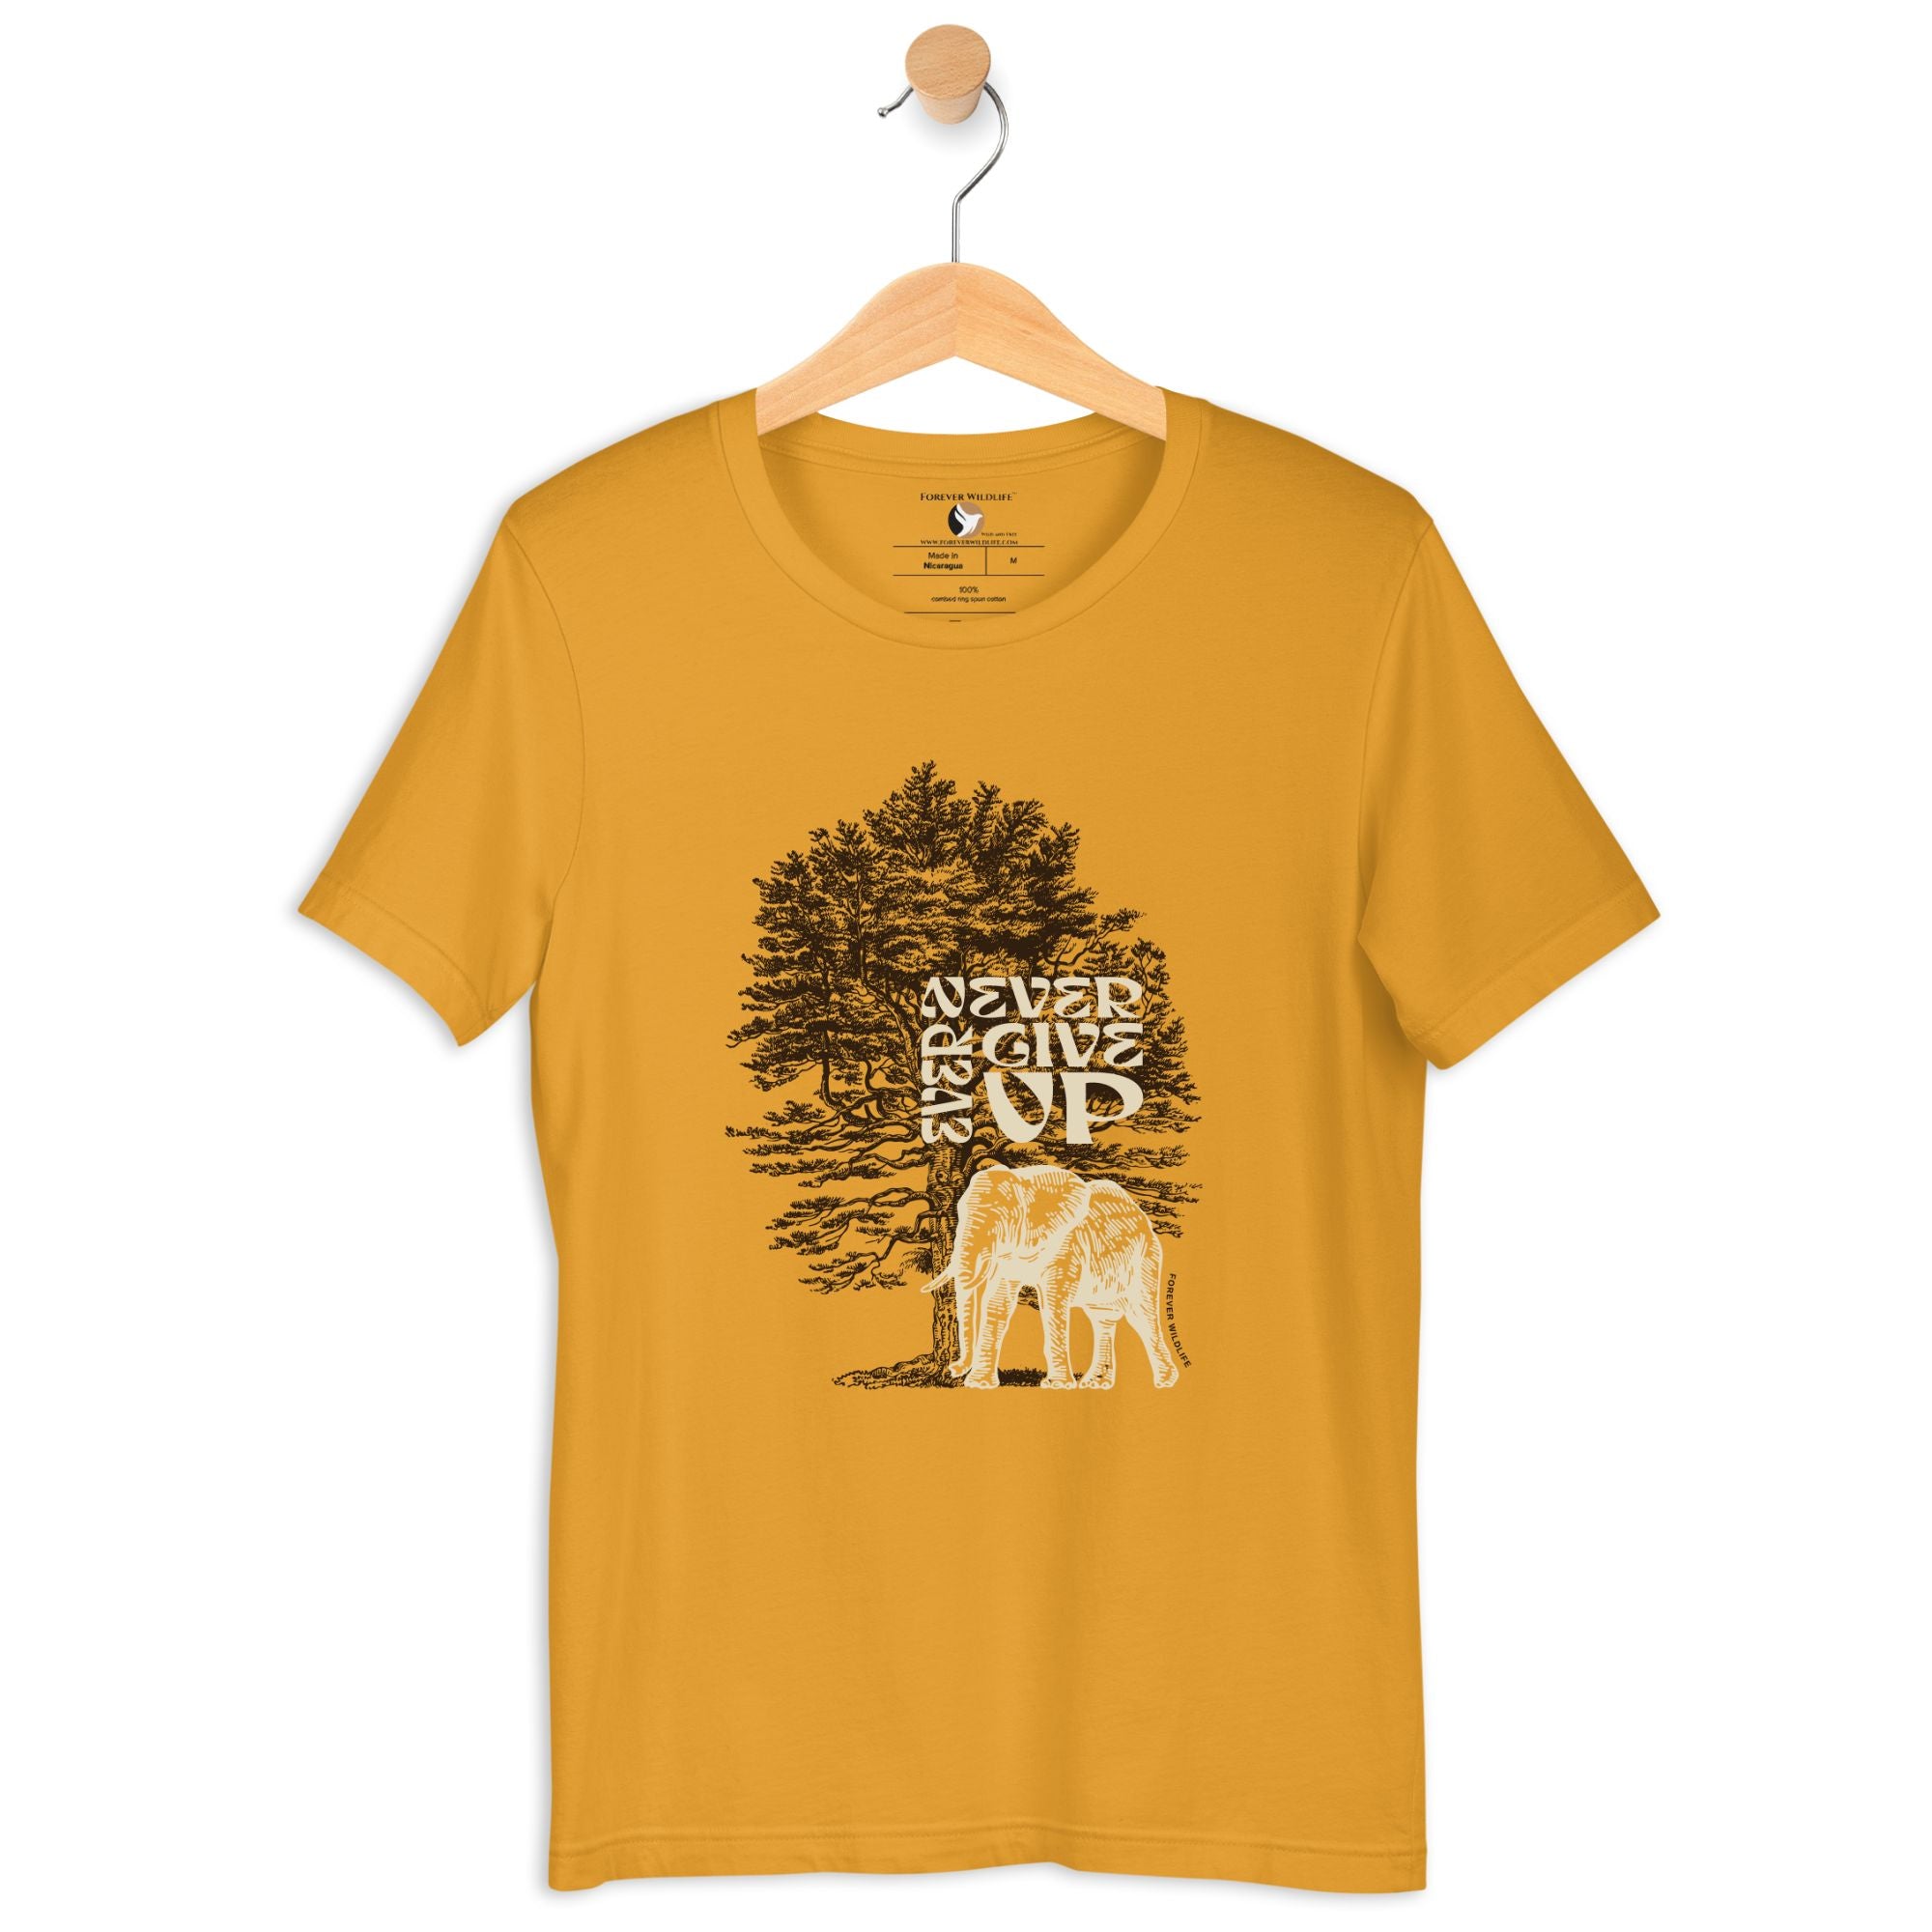 Elephant T-Shirt in Mustard – Premium Wildlife T-Shirt Design with Never Ever Give Up text, Elephant Shirts & Wildlife Clothing